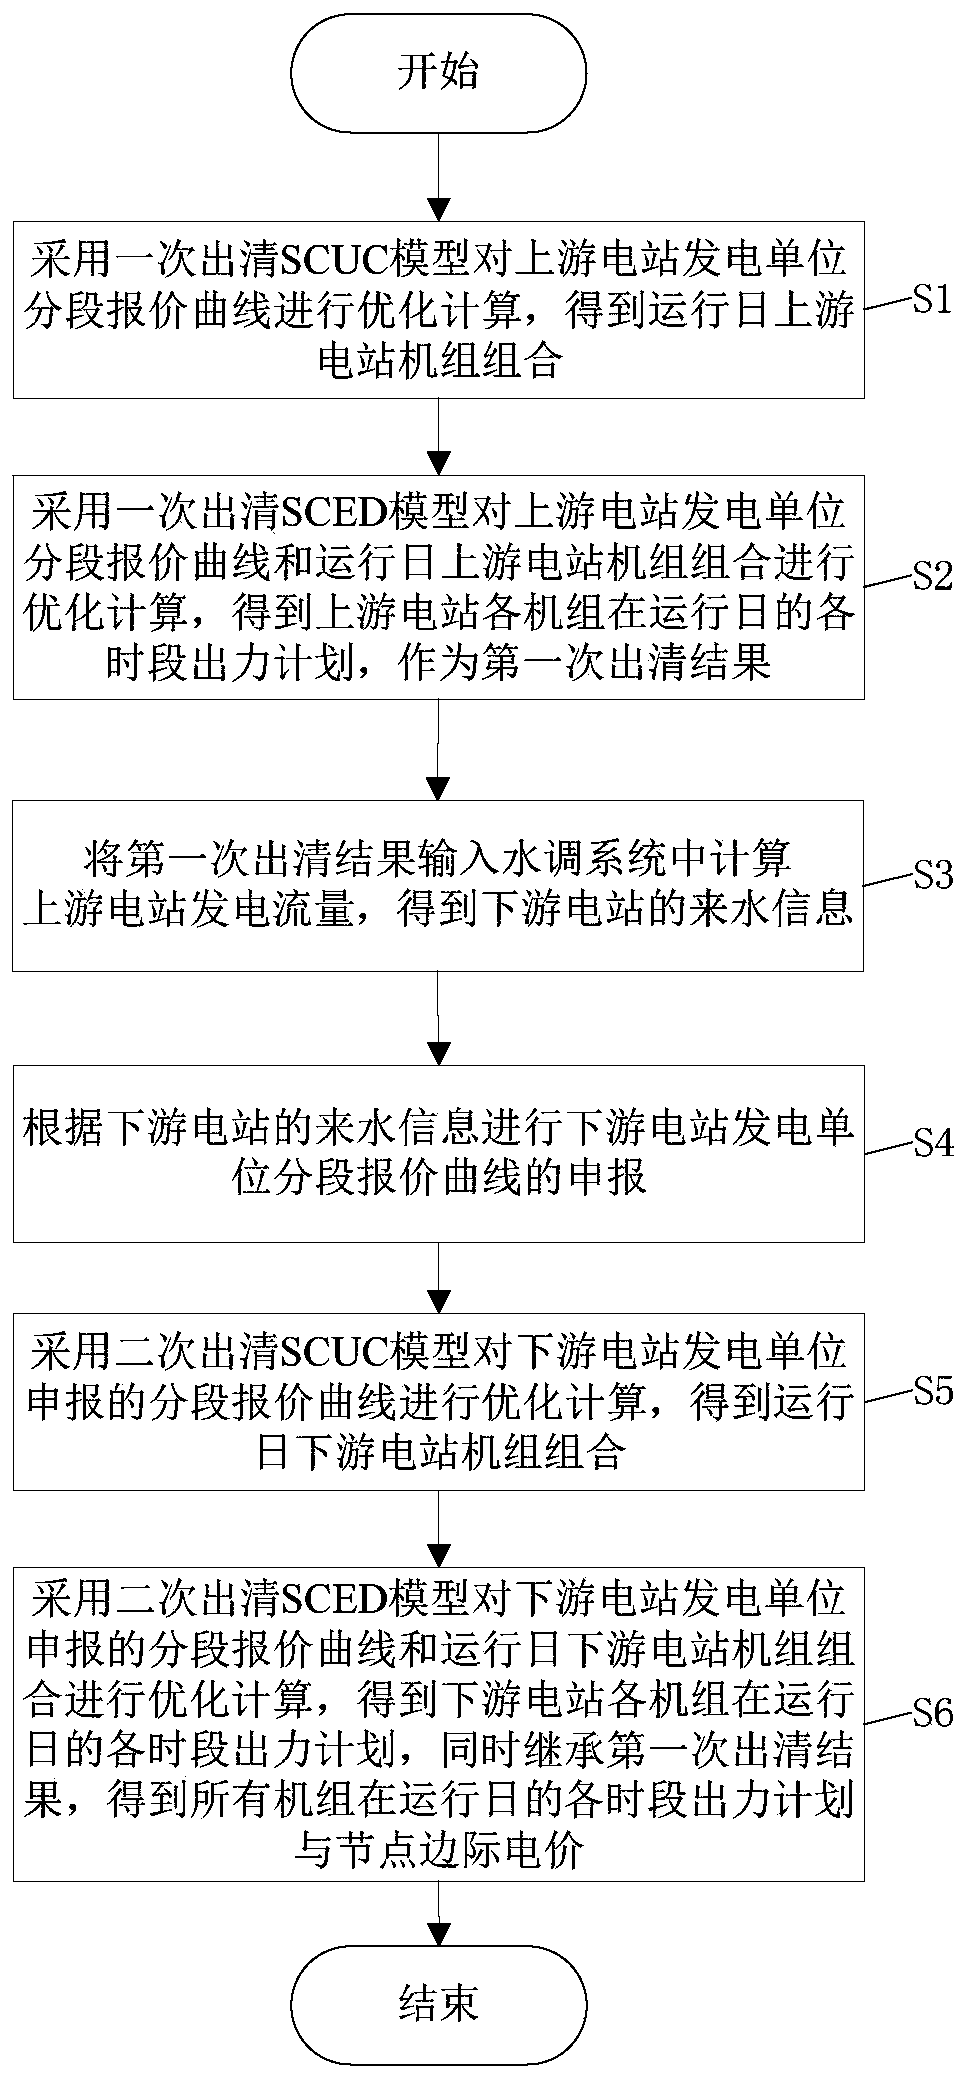 Basin cascade upstream and downstream power station participation electric power spot market secondary clearing method